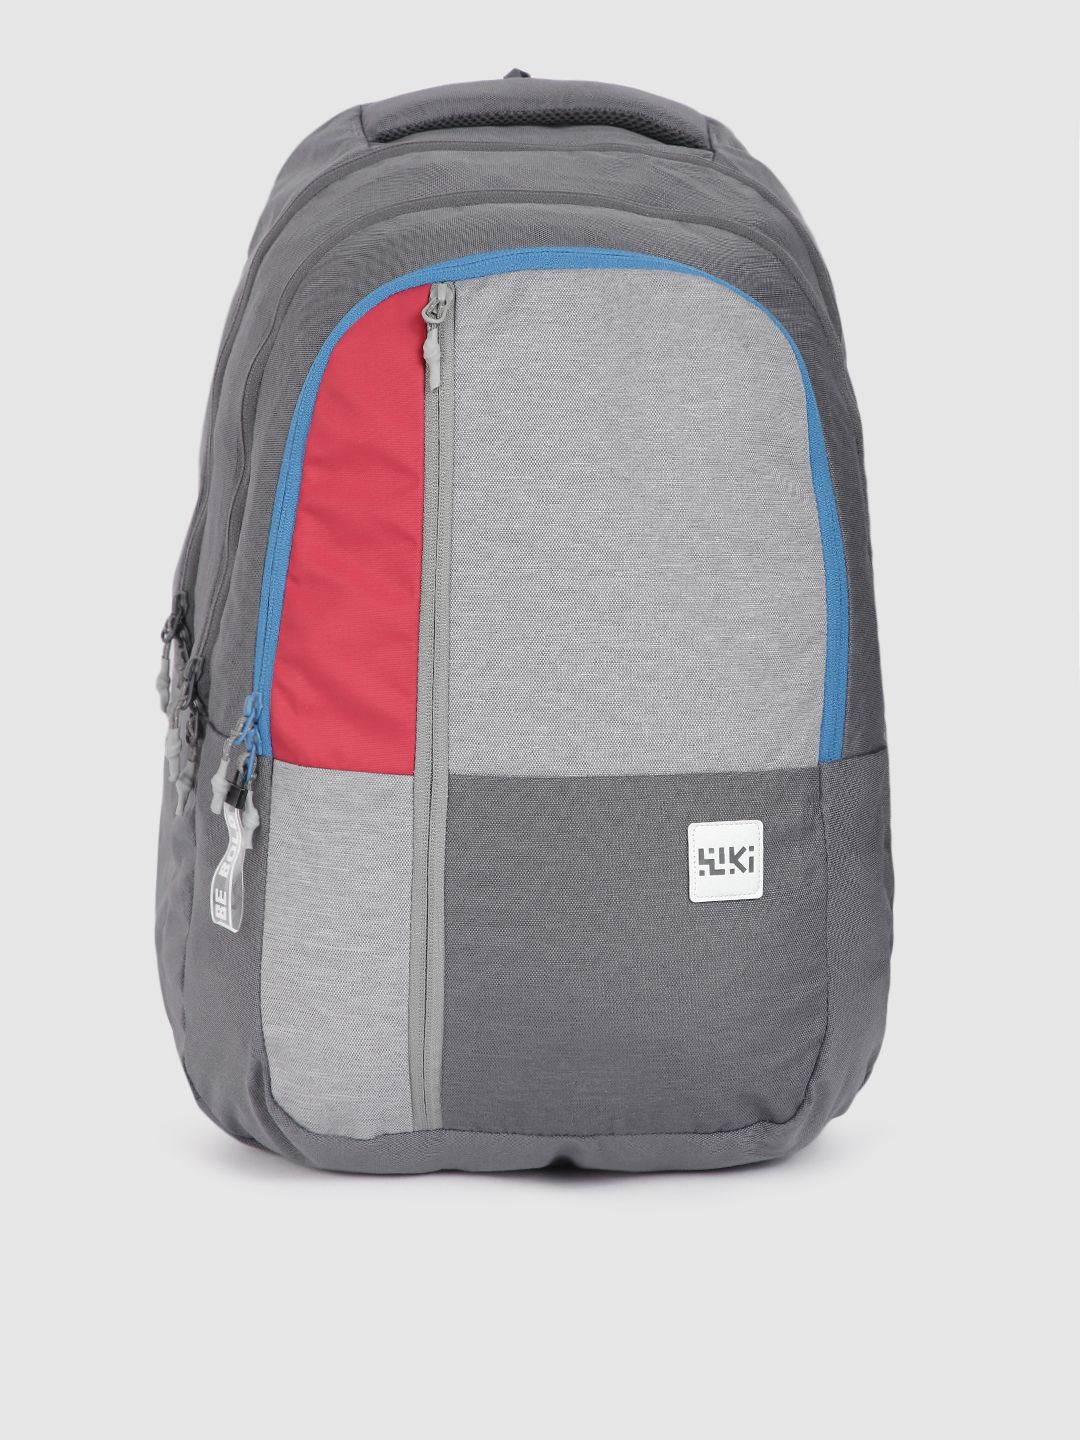 Wildcraft Unisex Grey WIKI PACK 7 Colourblocked Raincover Backpack Price in India